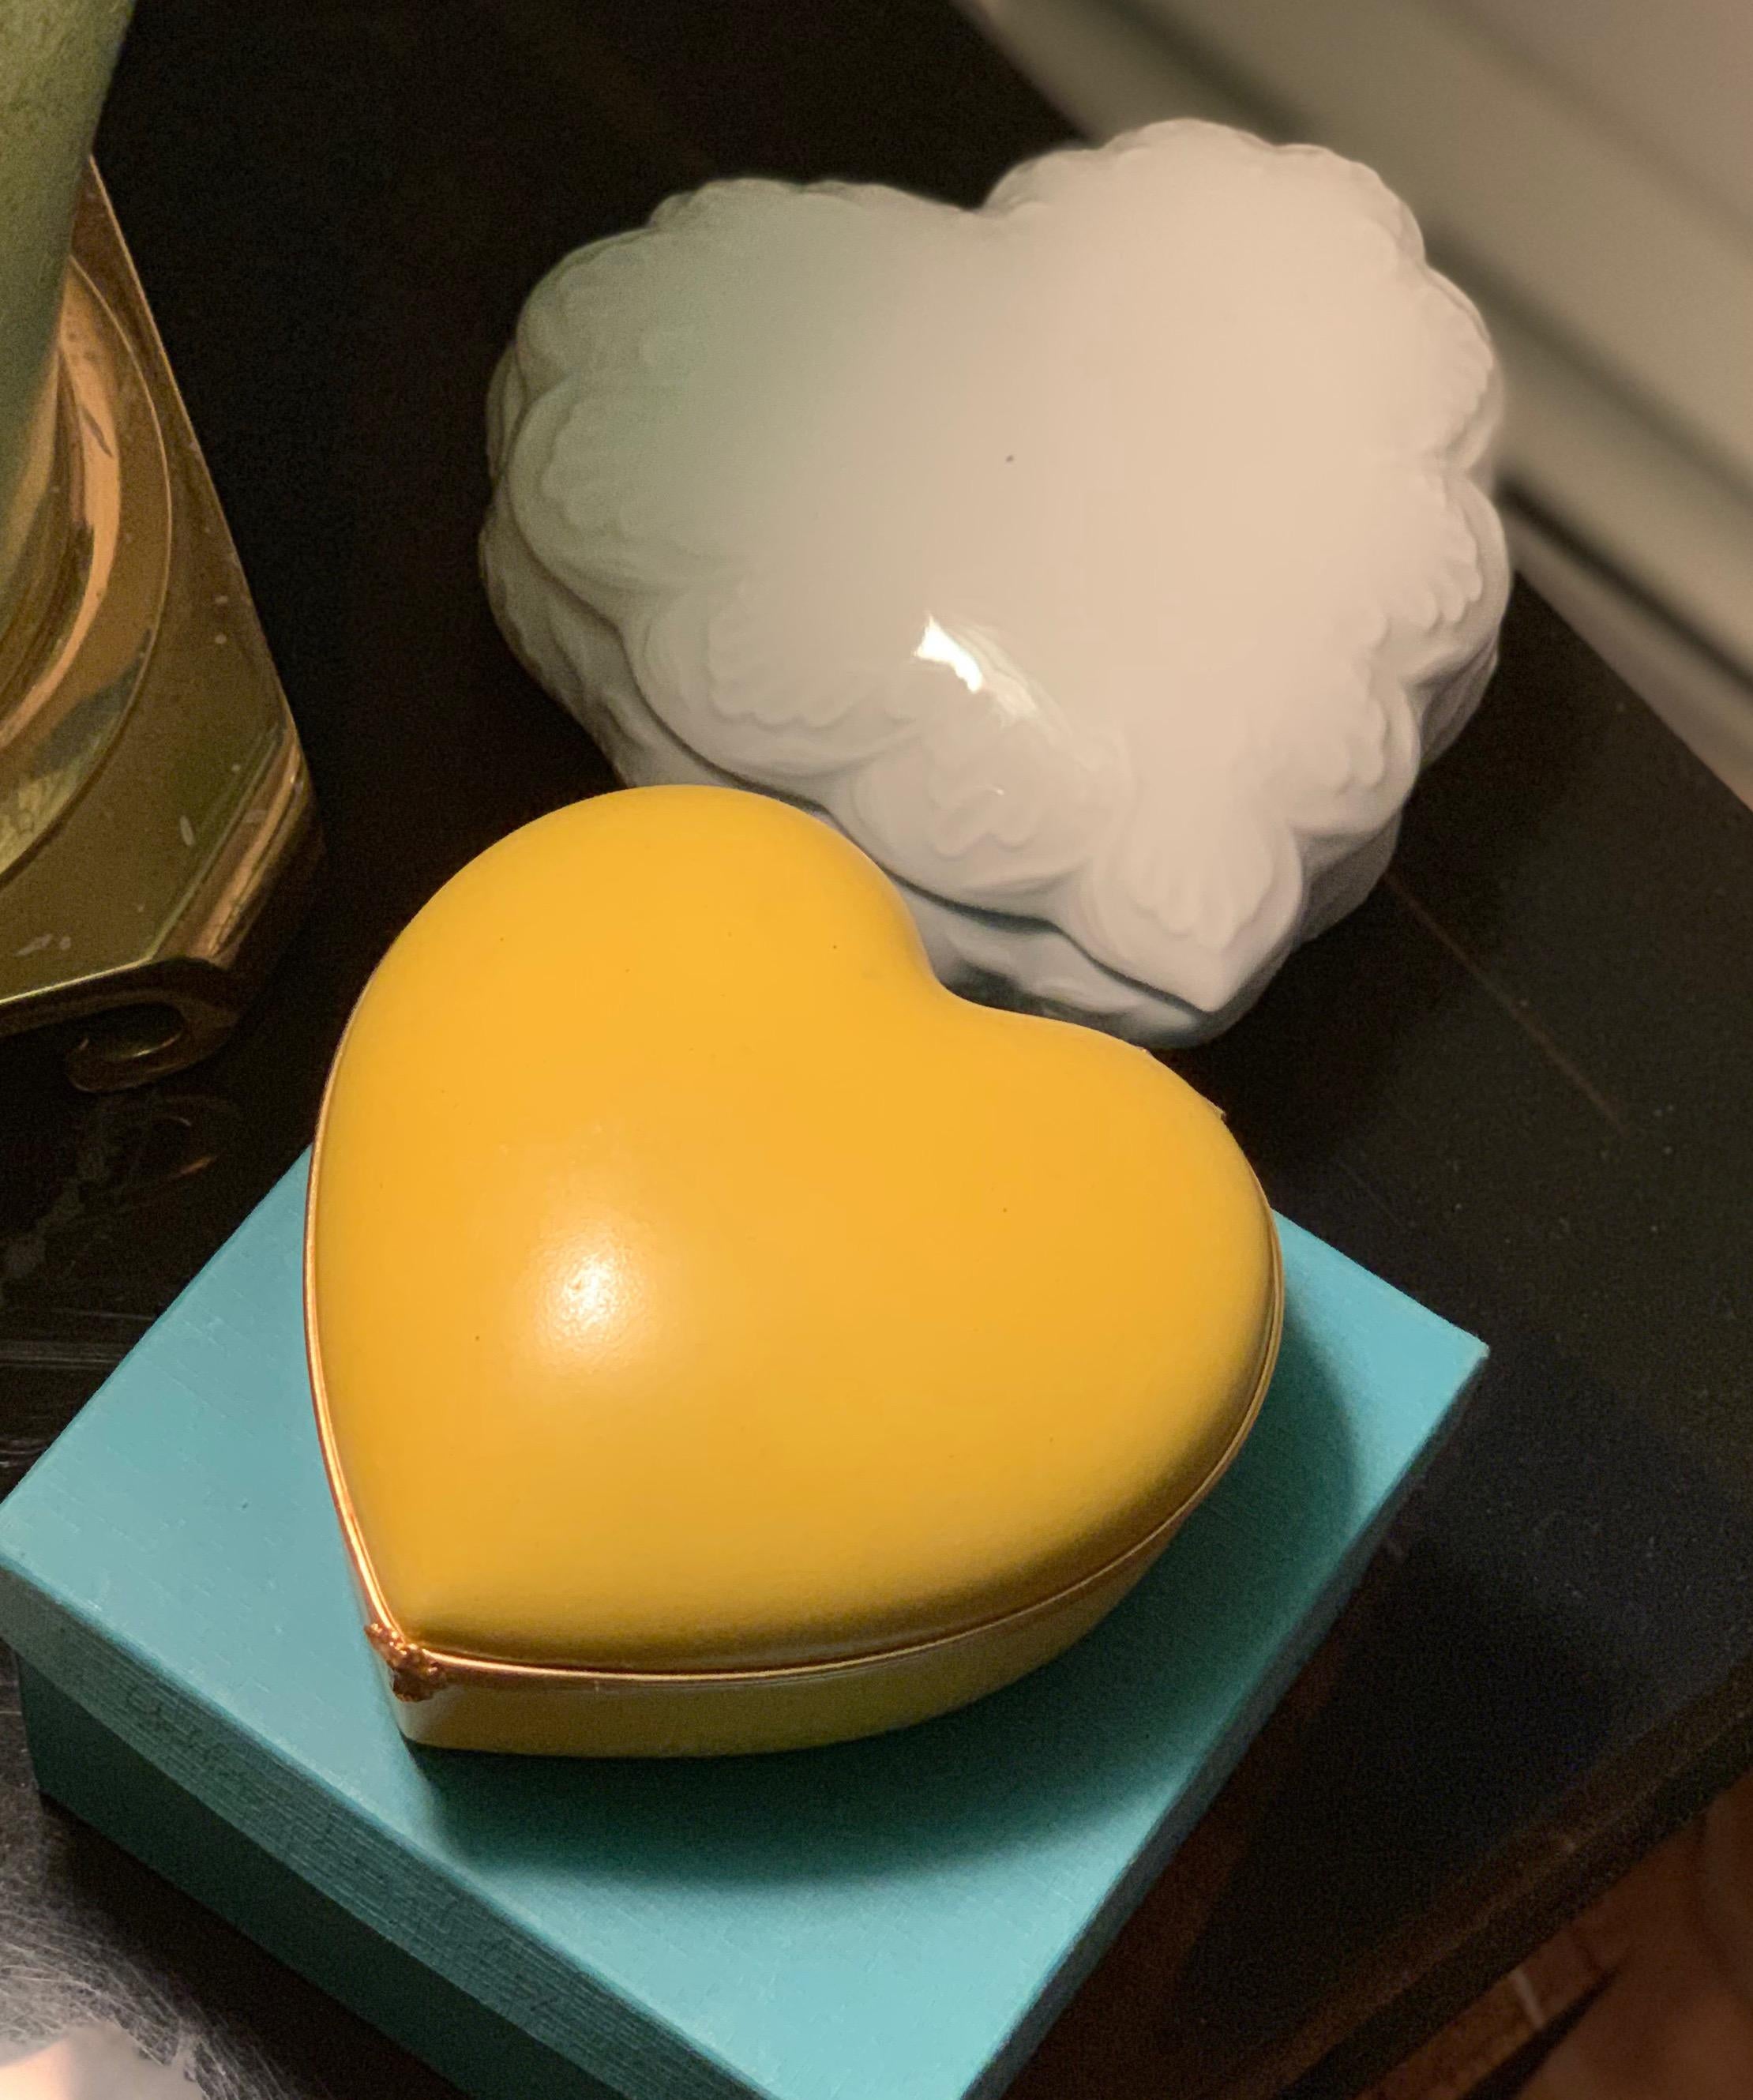 Limoges Porcelain Heart Trinket Box, Canary Yellow, French Porcelain Jewelry Box 1